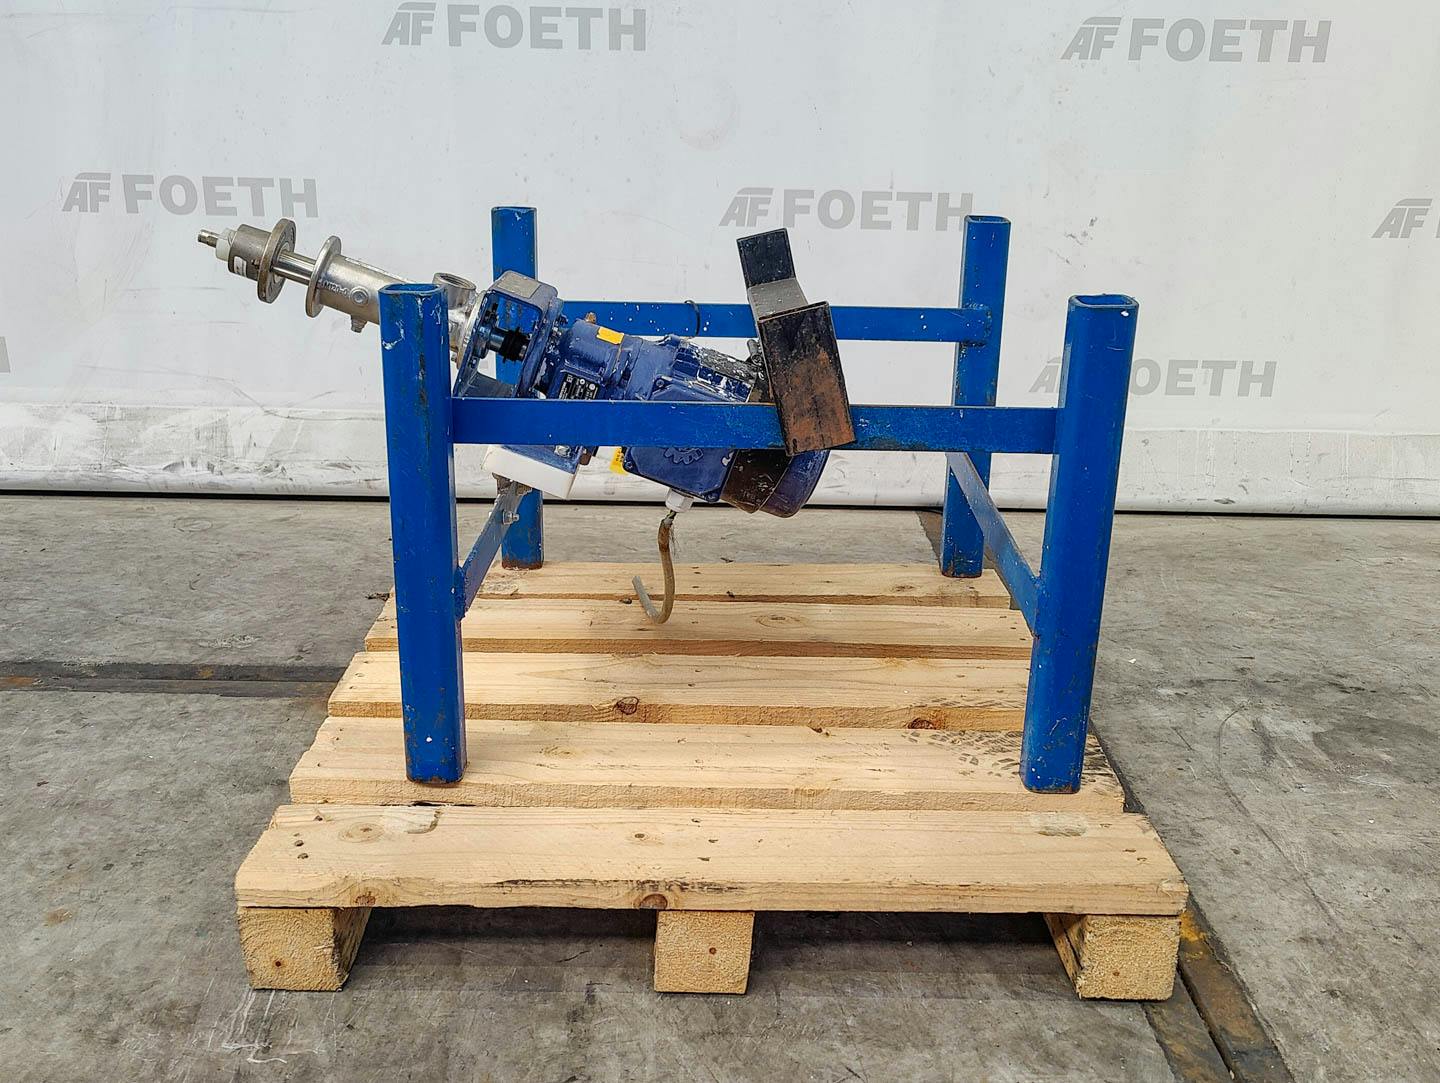 Seepex MD 003-12 - Positive displacement pump